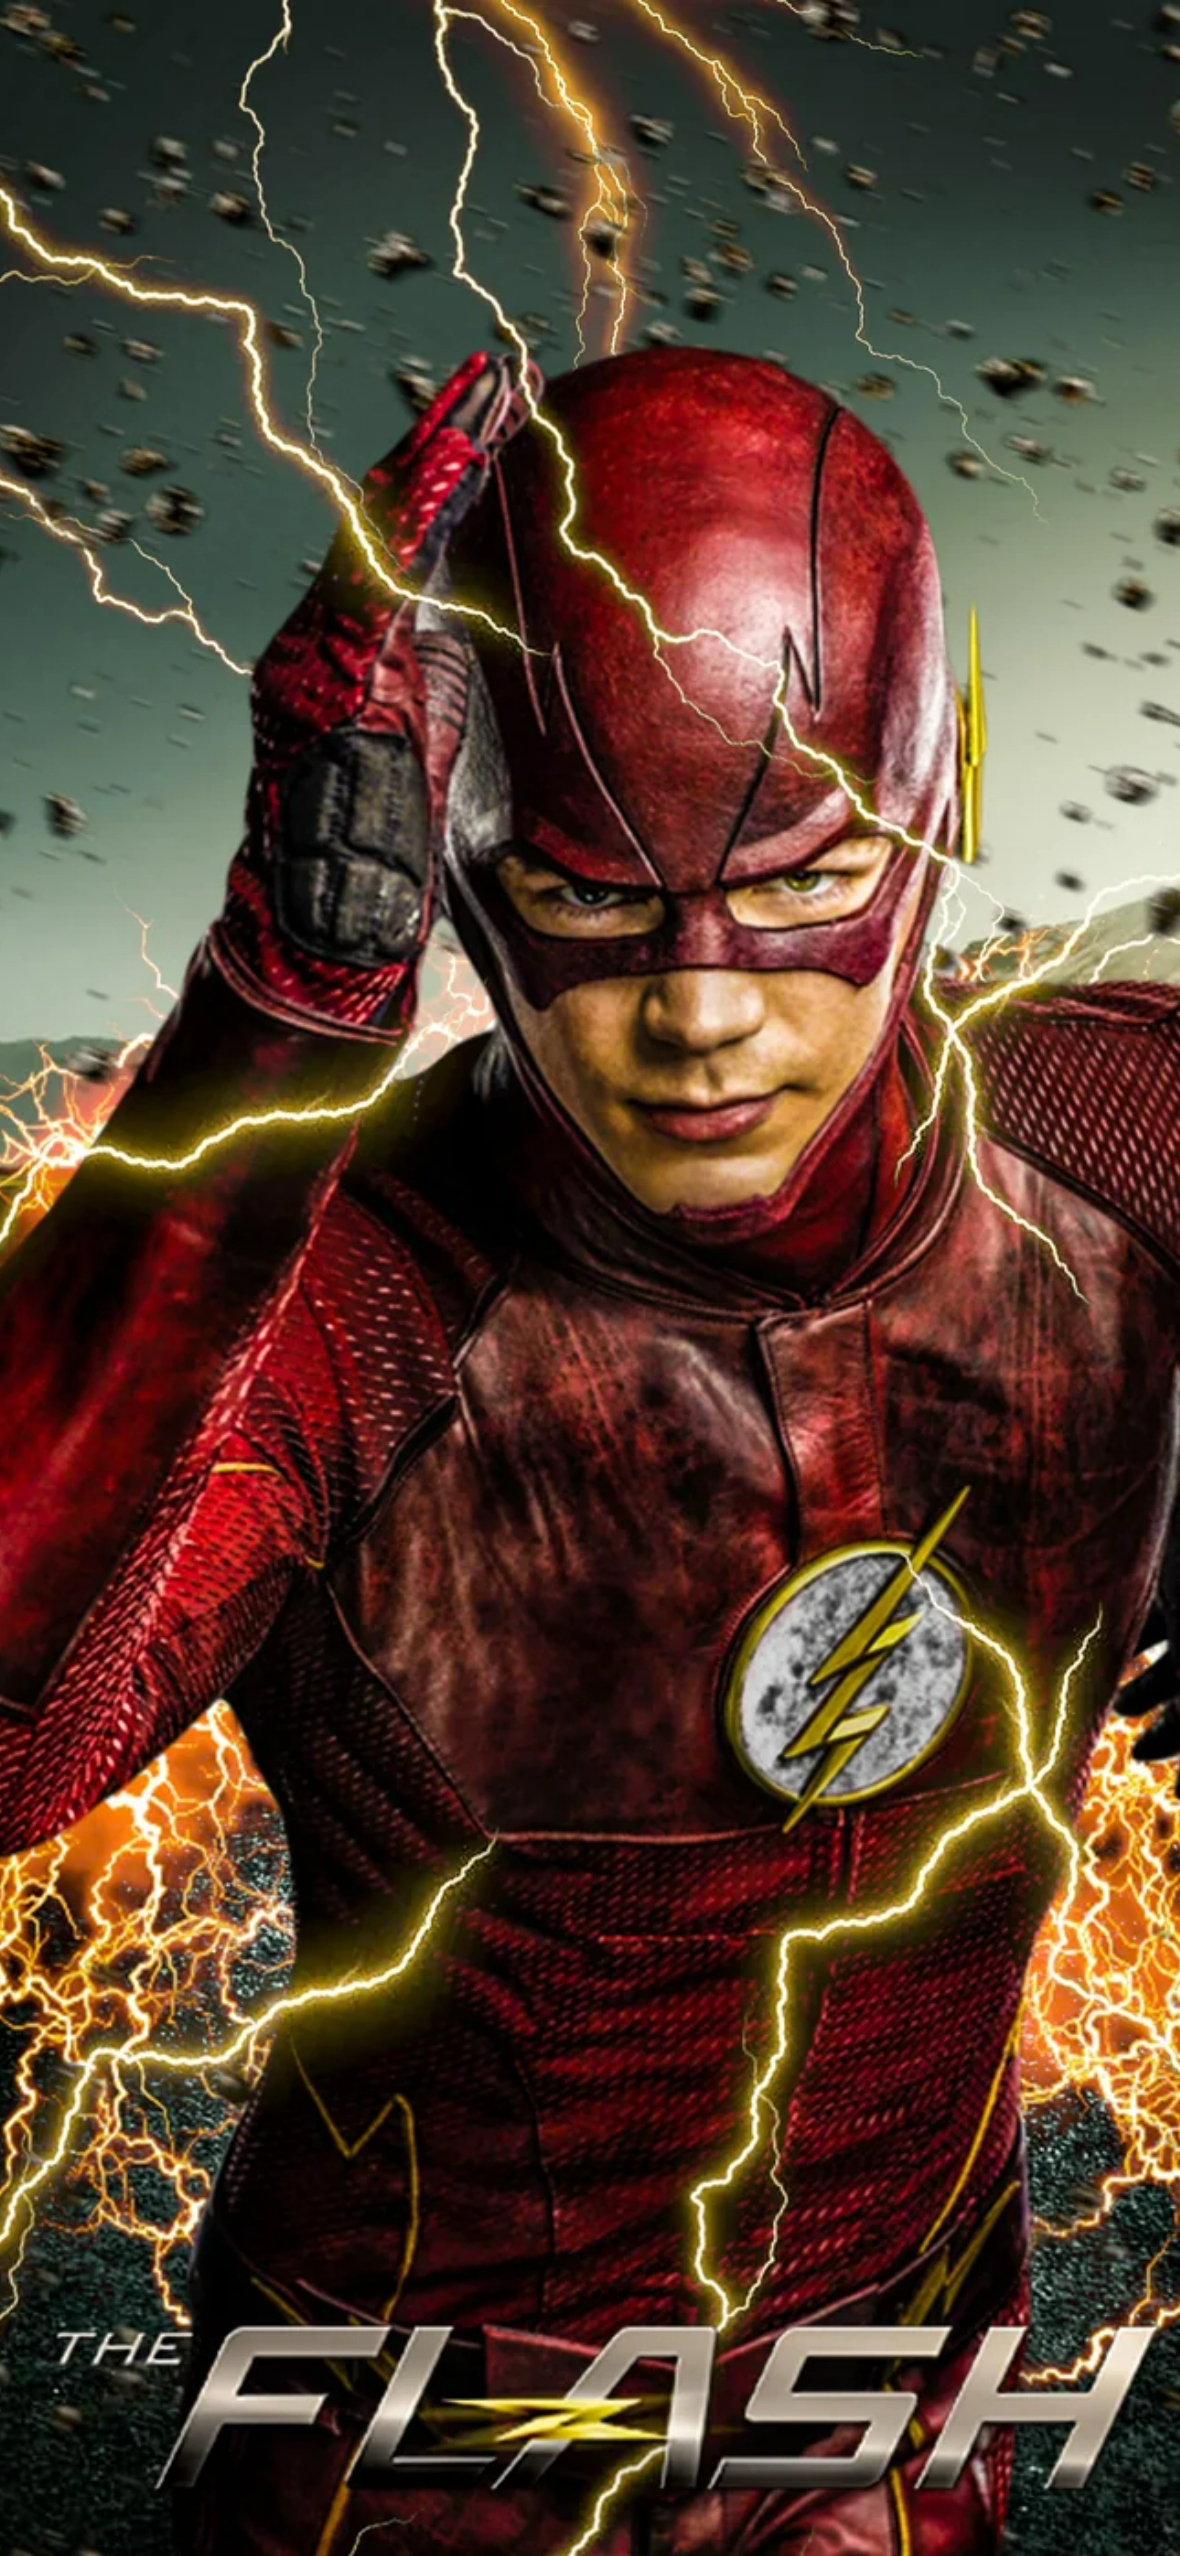 The Flash Wallpaper iPhone 8